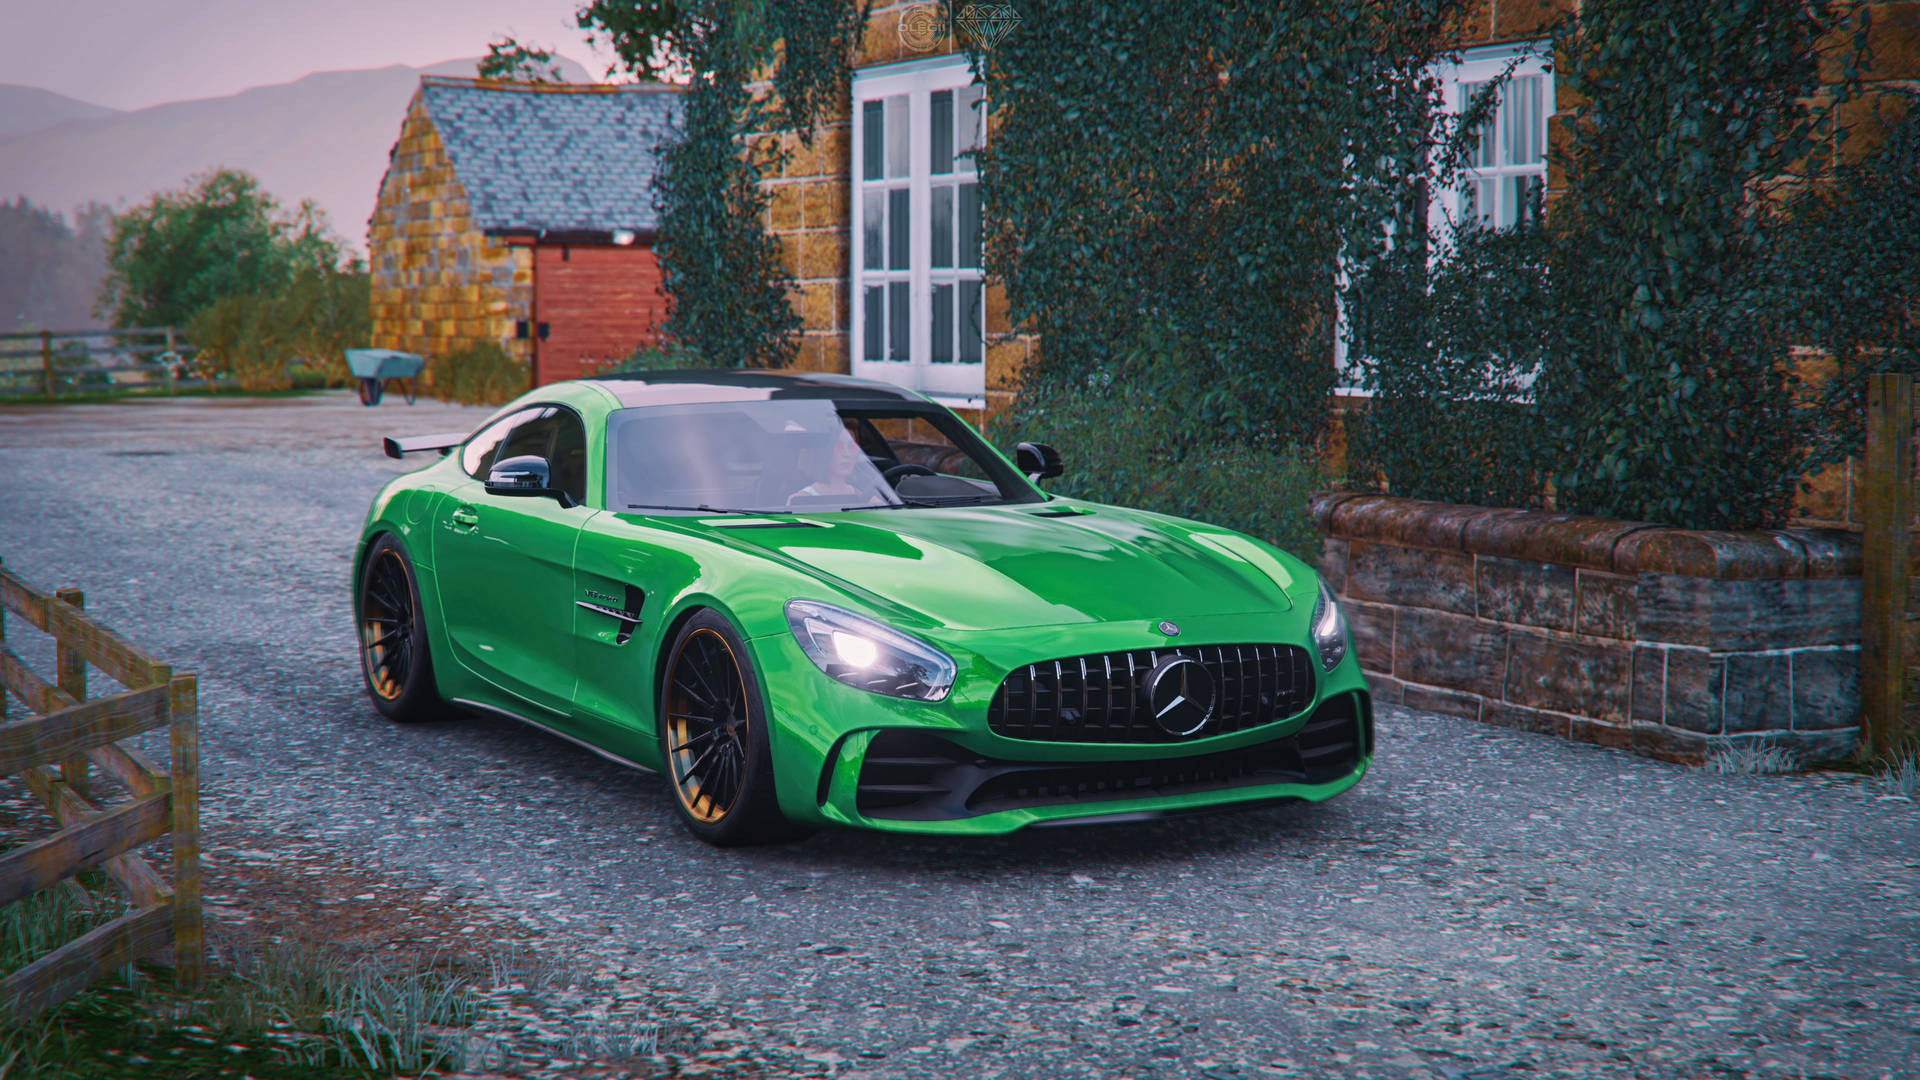 Caption: Exceptional Performance - Mercedes Amg In Forza Horizon 4